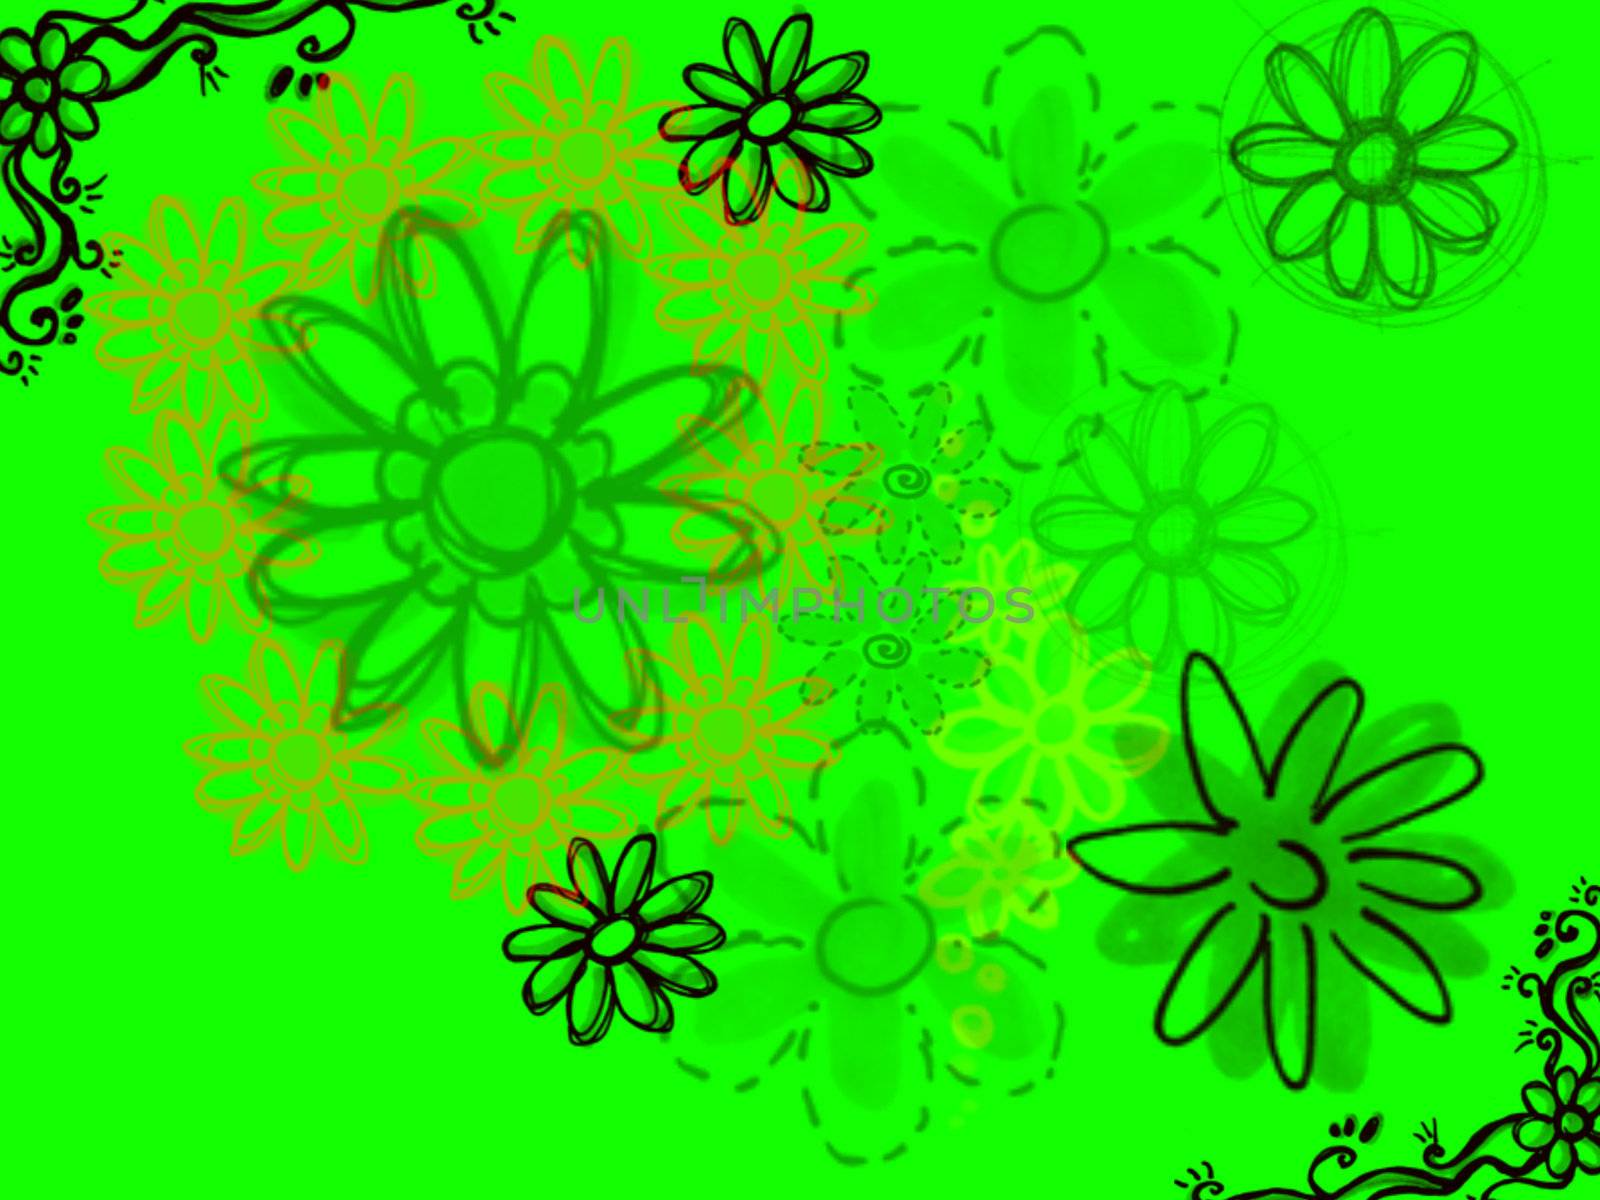 Sketched Flowers in Black on Bright Green Background Illustration